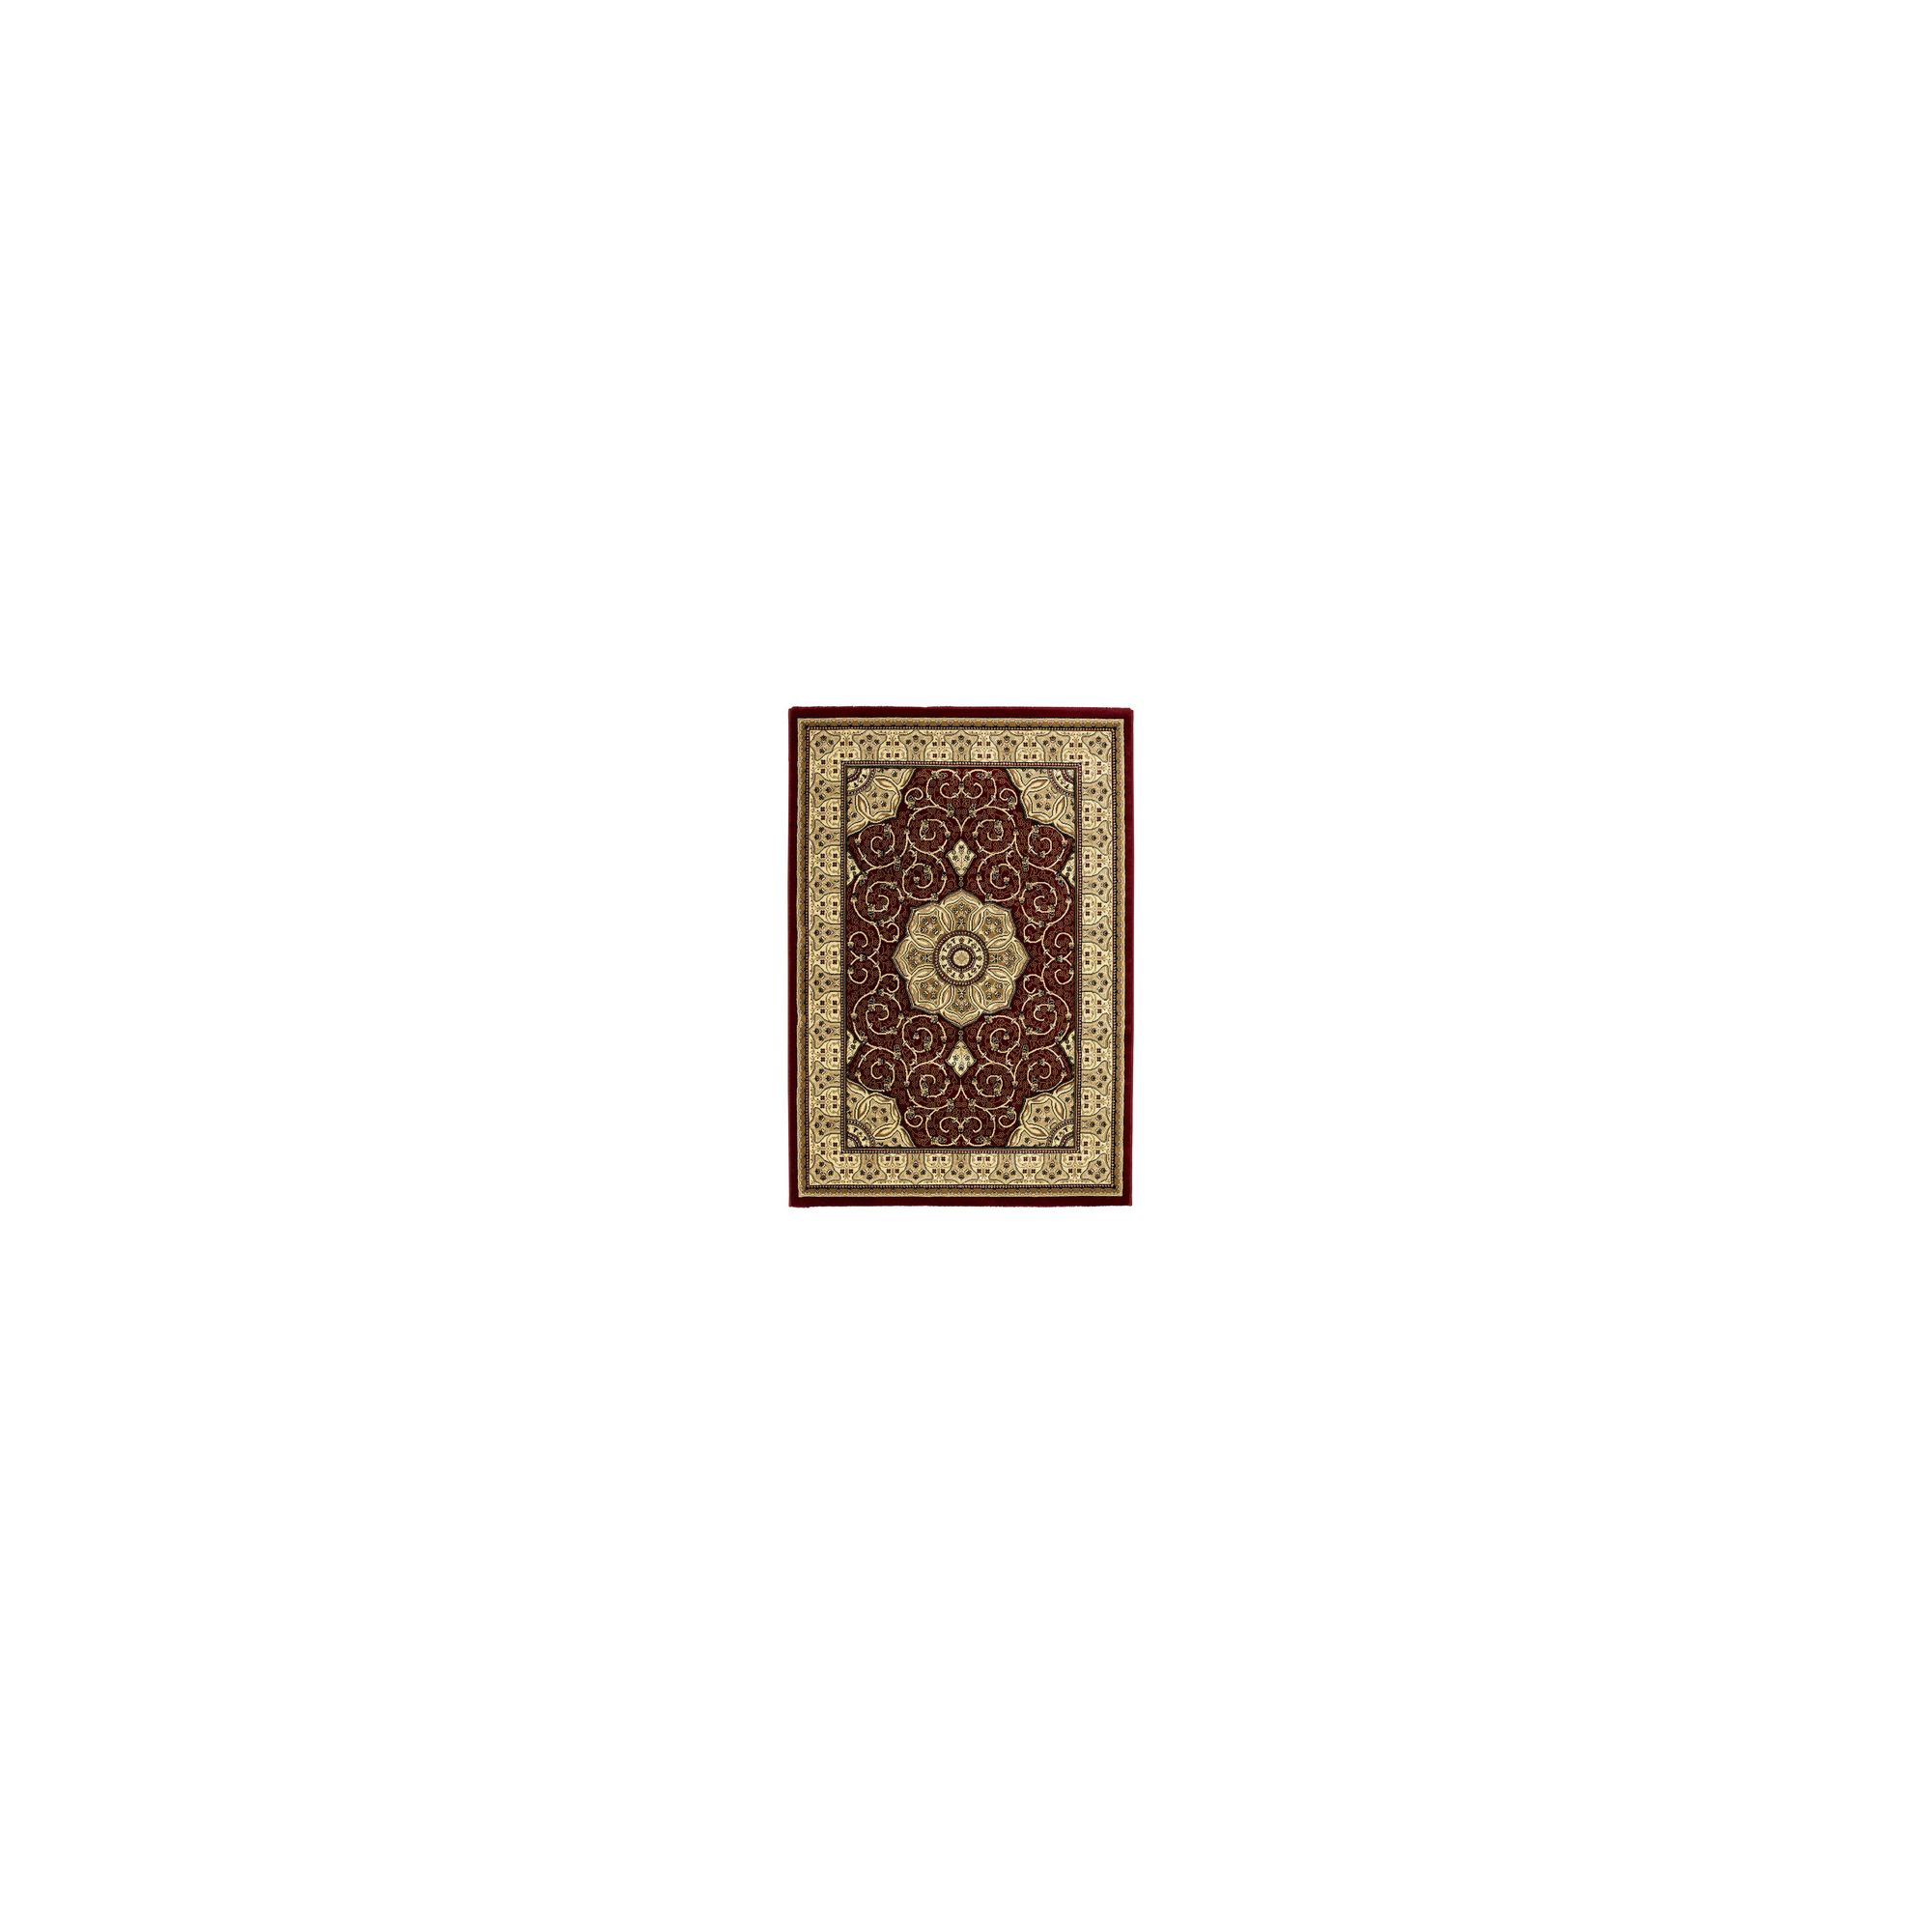 Oriental Carpets & Rugs Heritage 4400 Red Rug - 280cm x 380cm at Tesco Direct